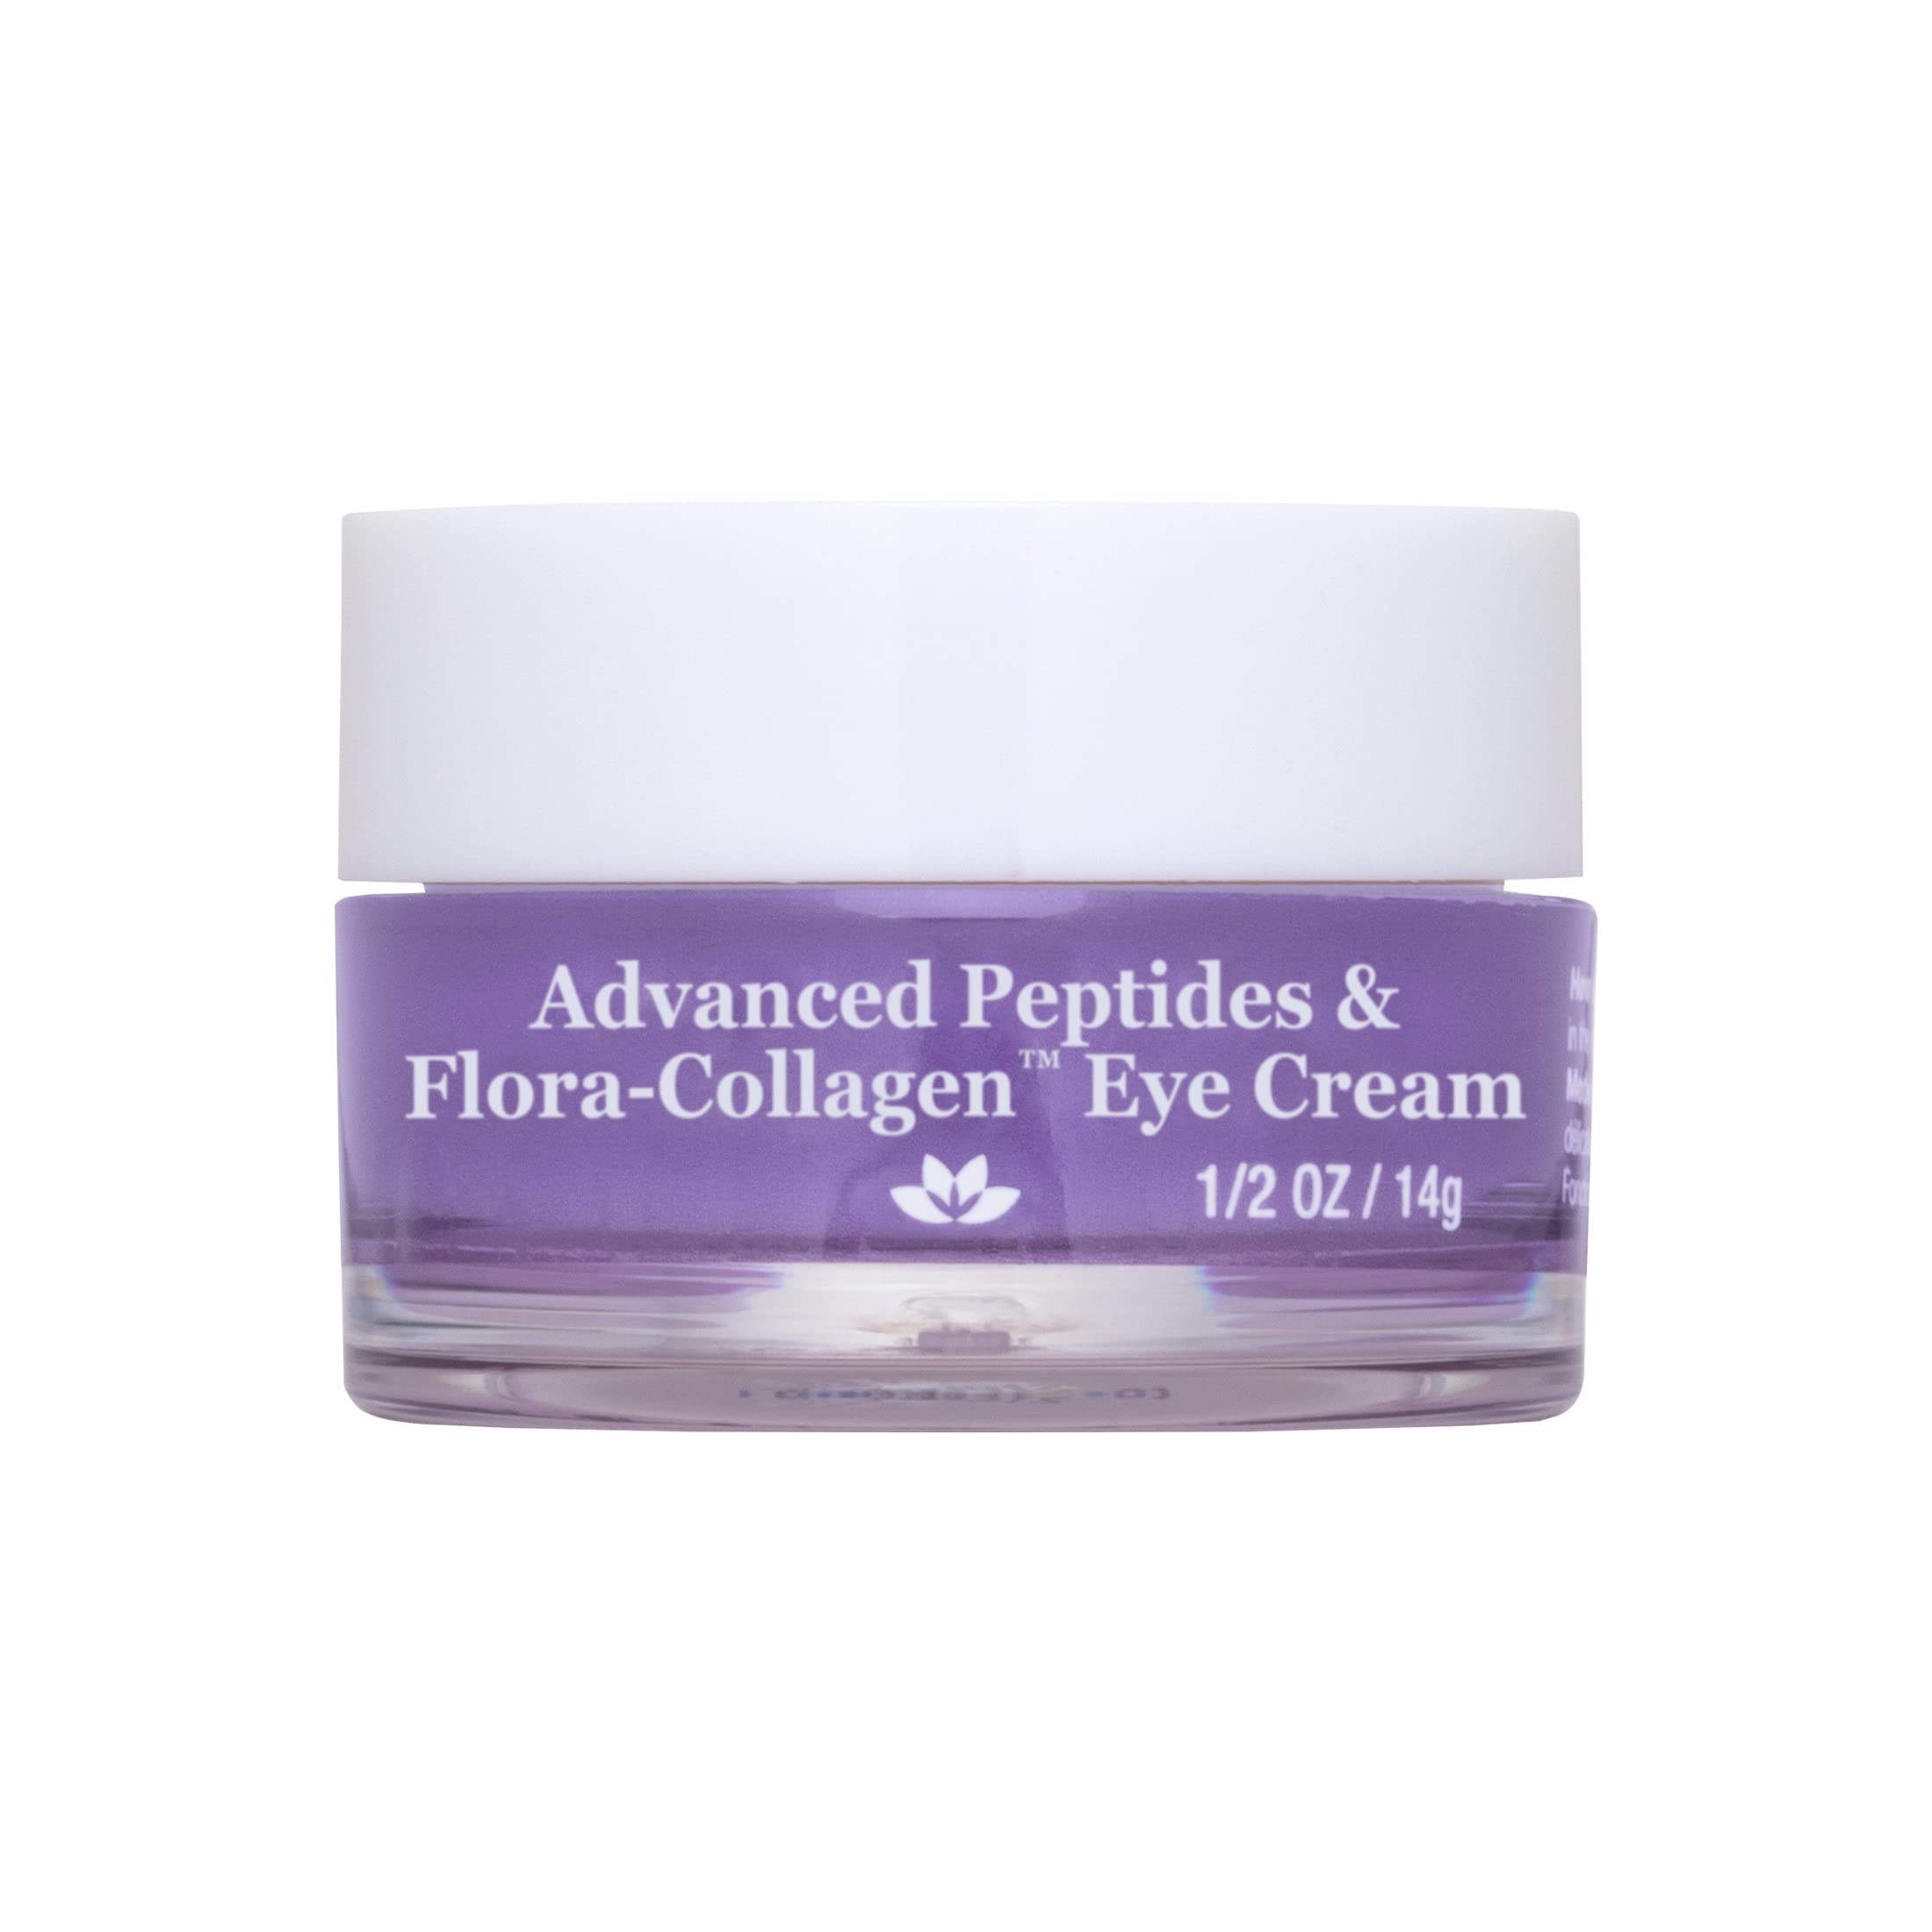 DERMA-E Advanced Peptides and Flora-Collagen Eye Cream – Anti-Aging Moisturizer Smooths Appearance of Crow’s Feet, Lines and Wrinkles, 1/2 Oz